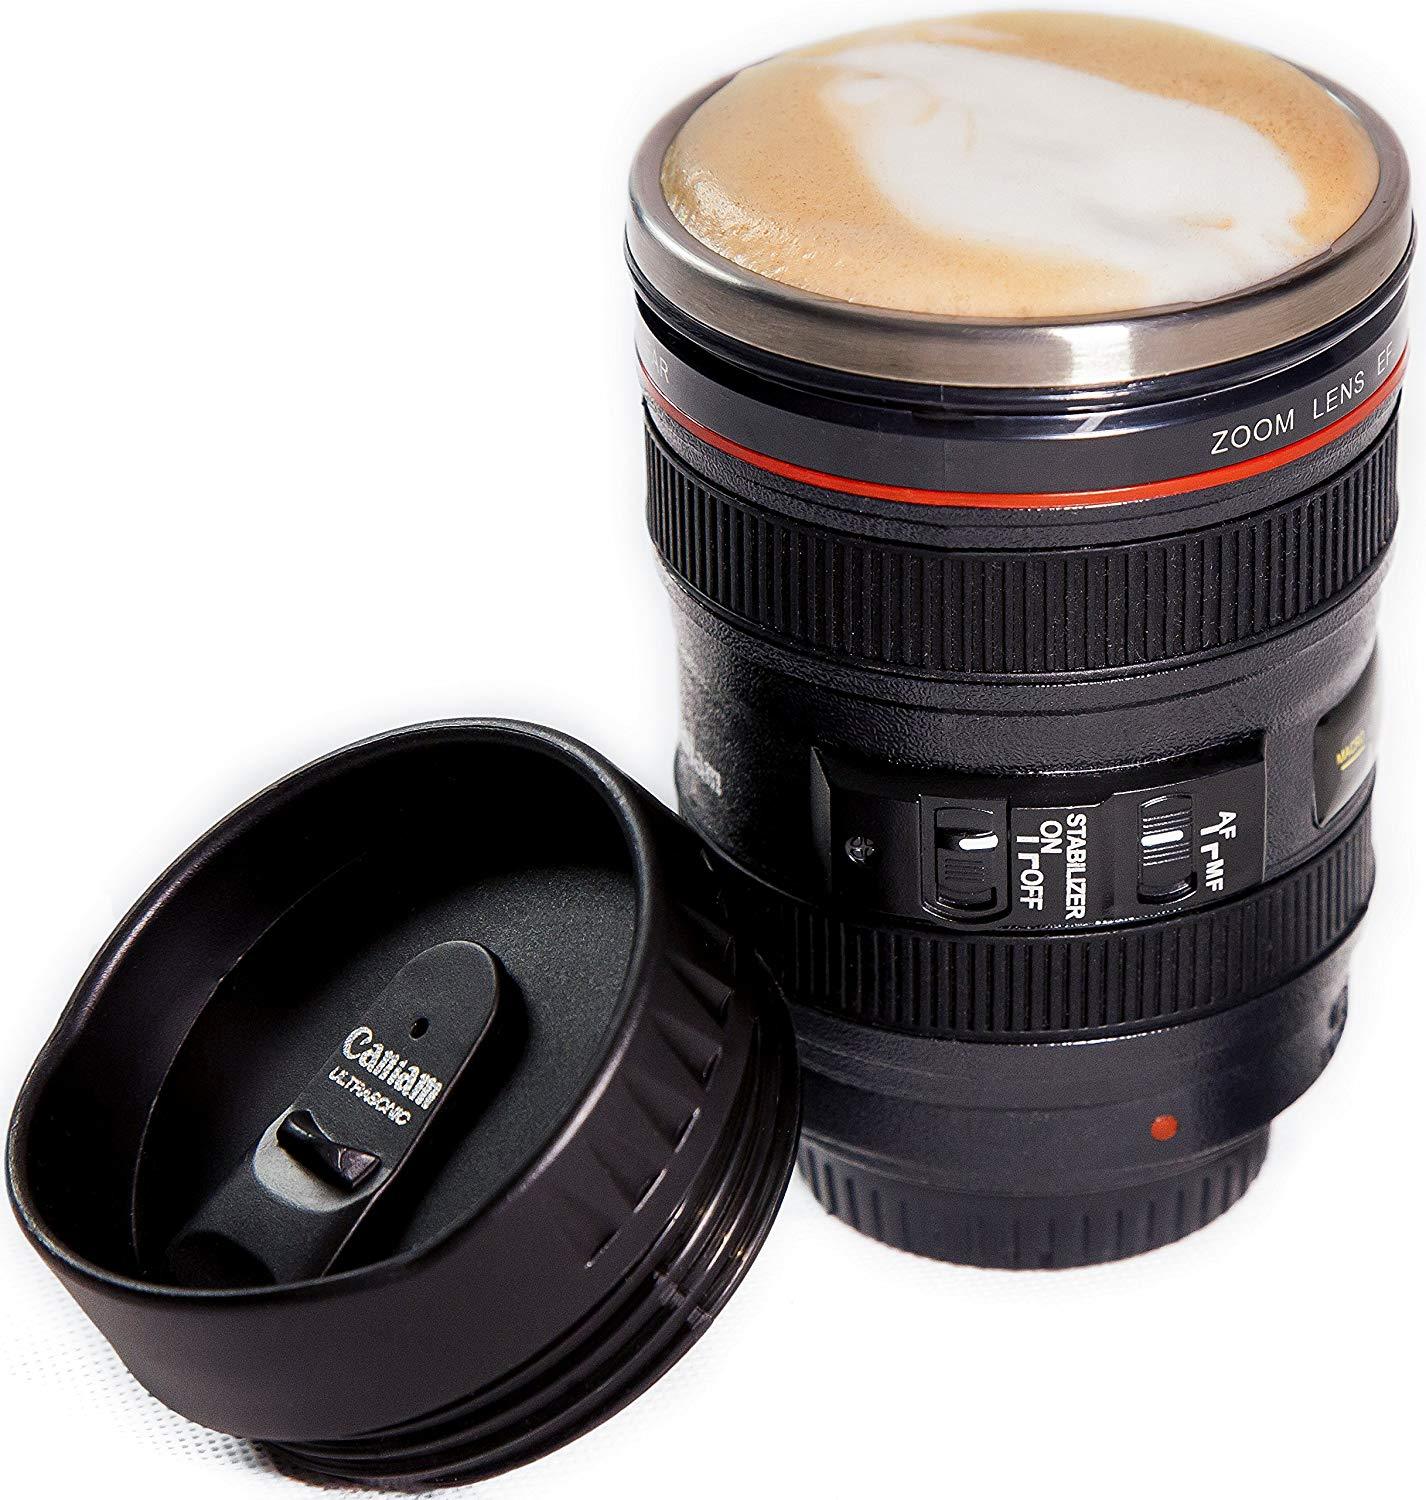 BPA Free Camera Lens Stainless Steel Travel Coffee Mug, Cup, Thermos